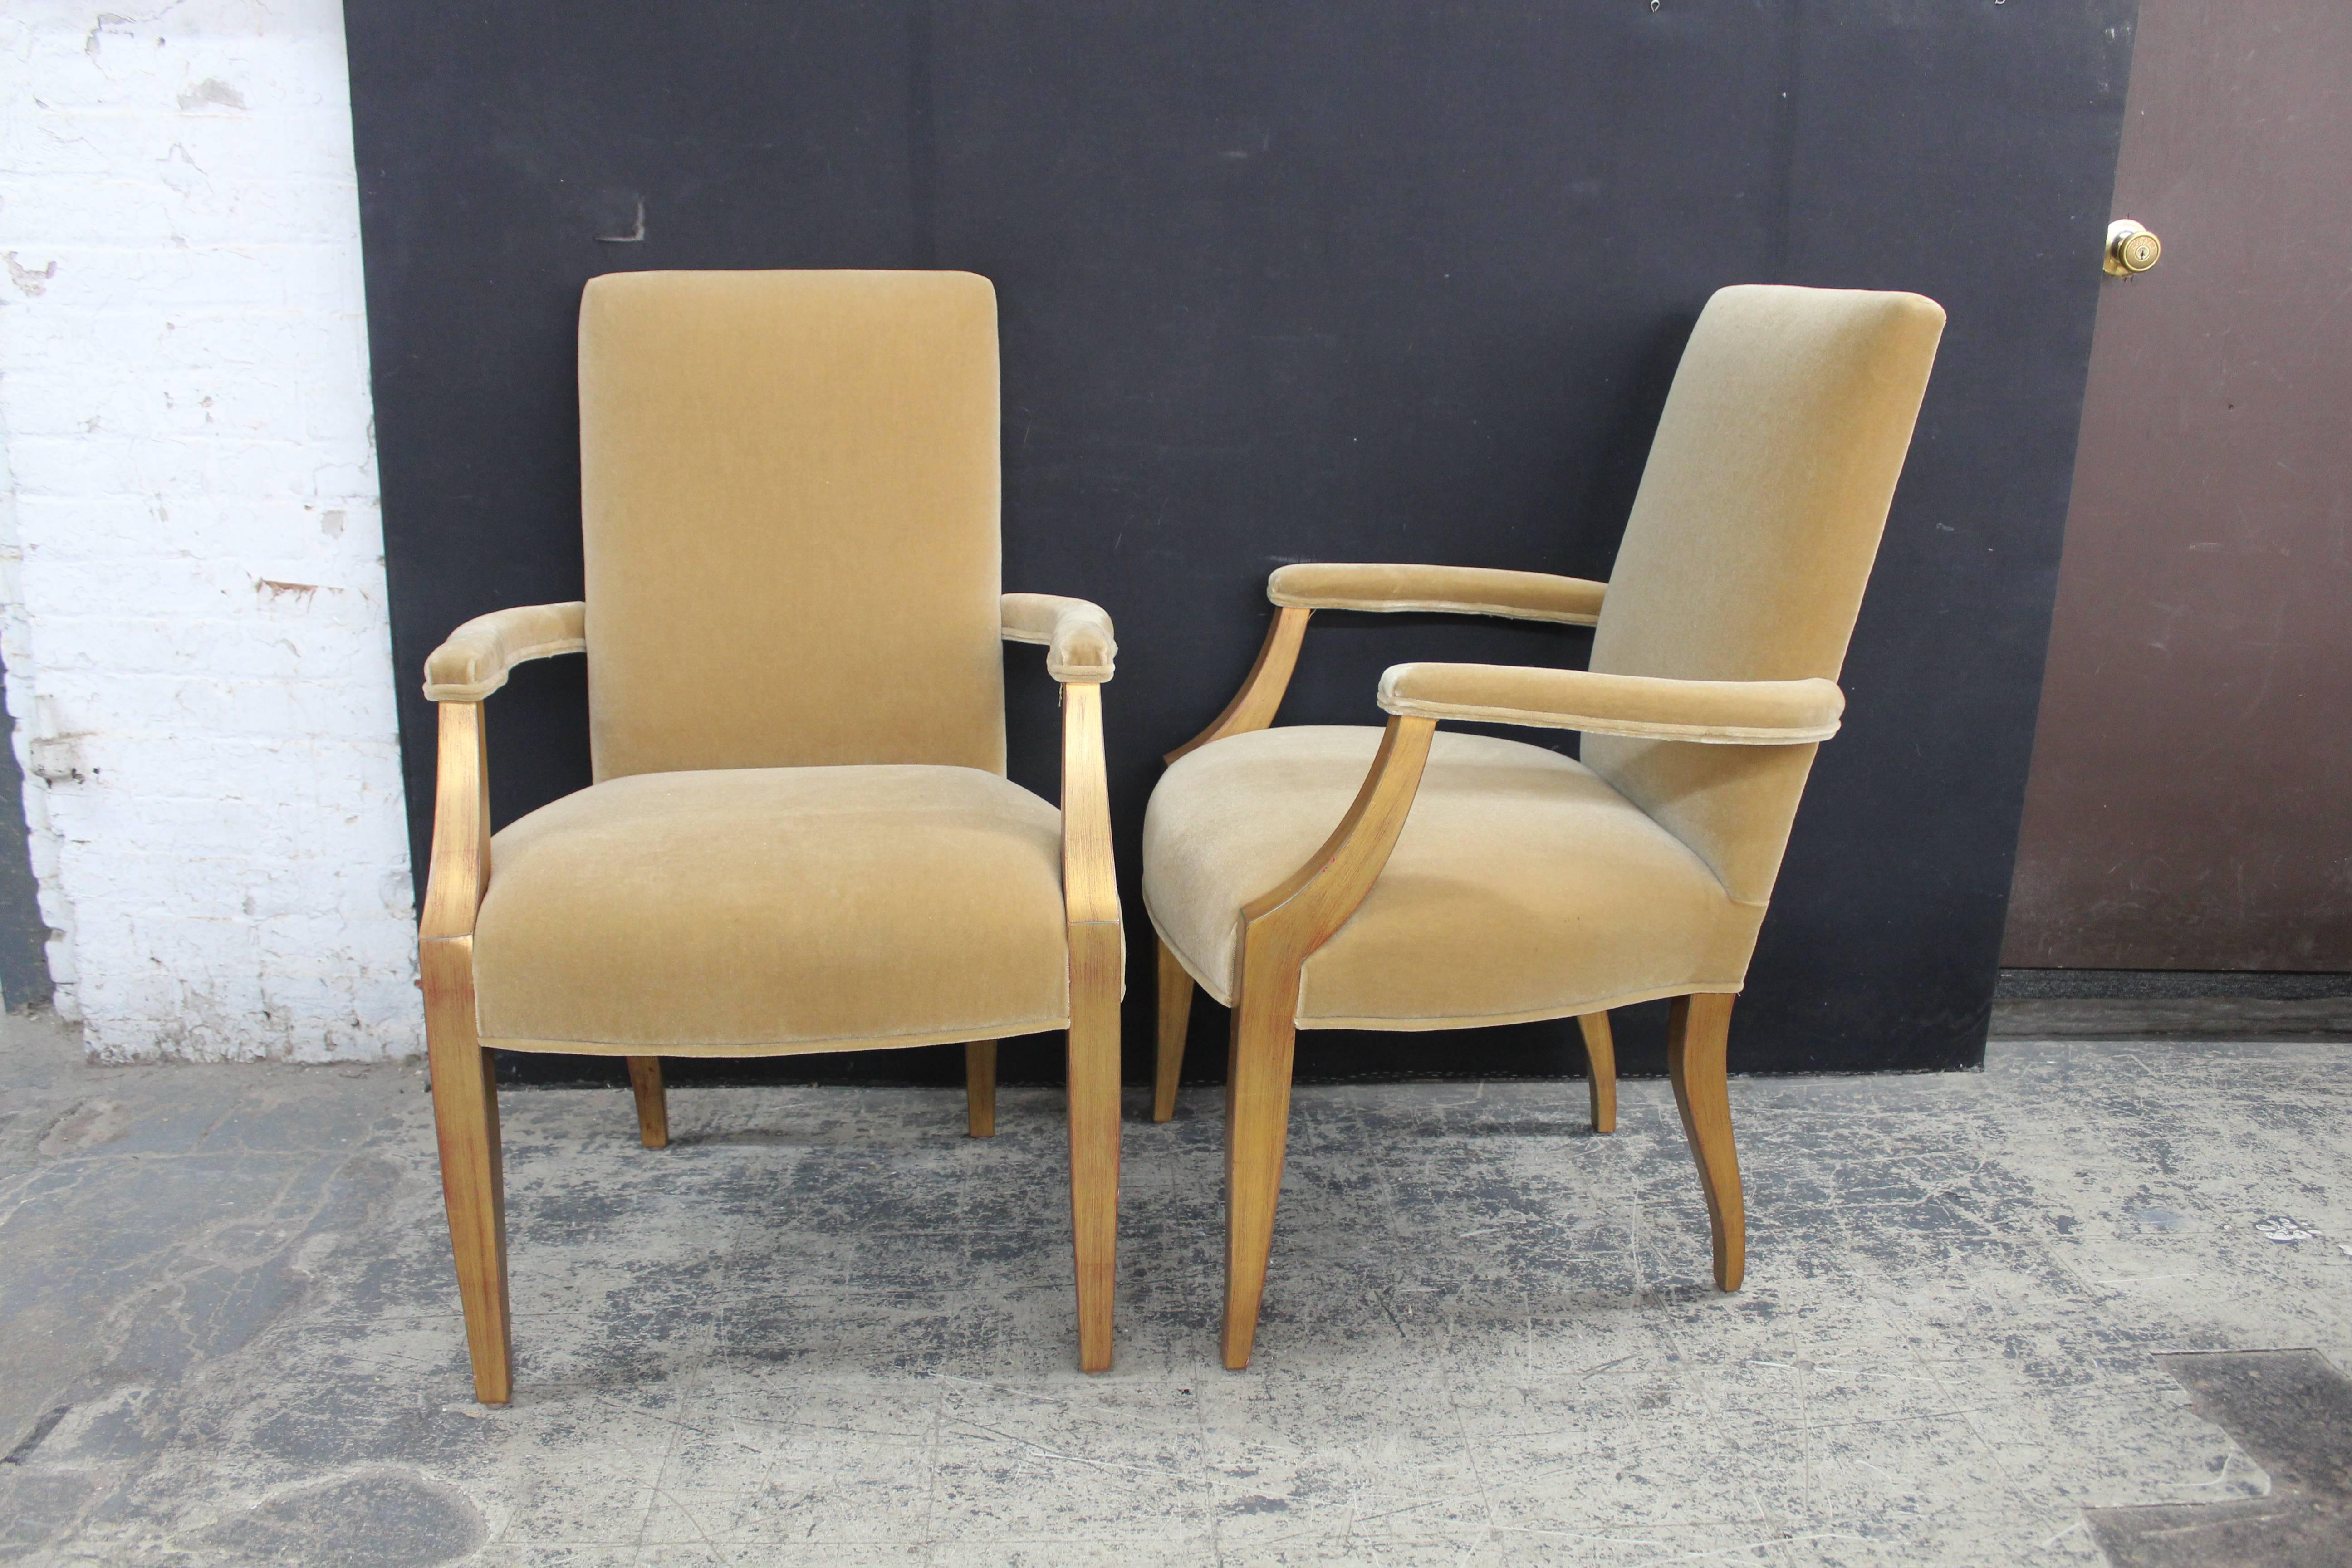 A pair of giltwood open armchairs in the manner of Andre Arbus. The chairs are upholstered in a rich golden Mohair on the seat, seat back and arms. The outside back is in a striped velvet. The gilded finish is a wash allowing the gesso to show